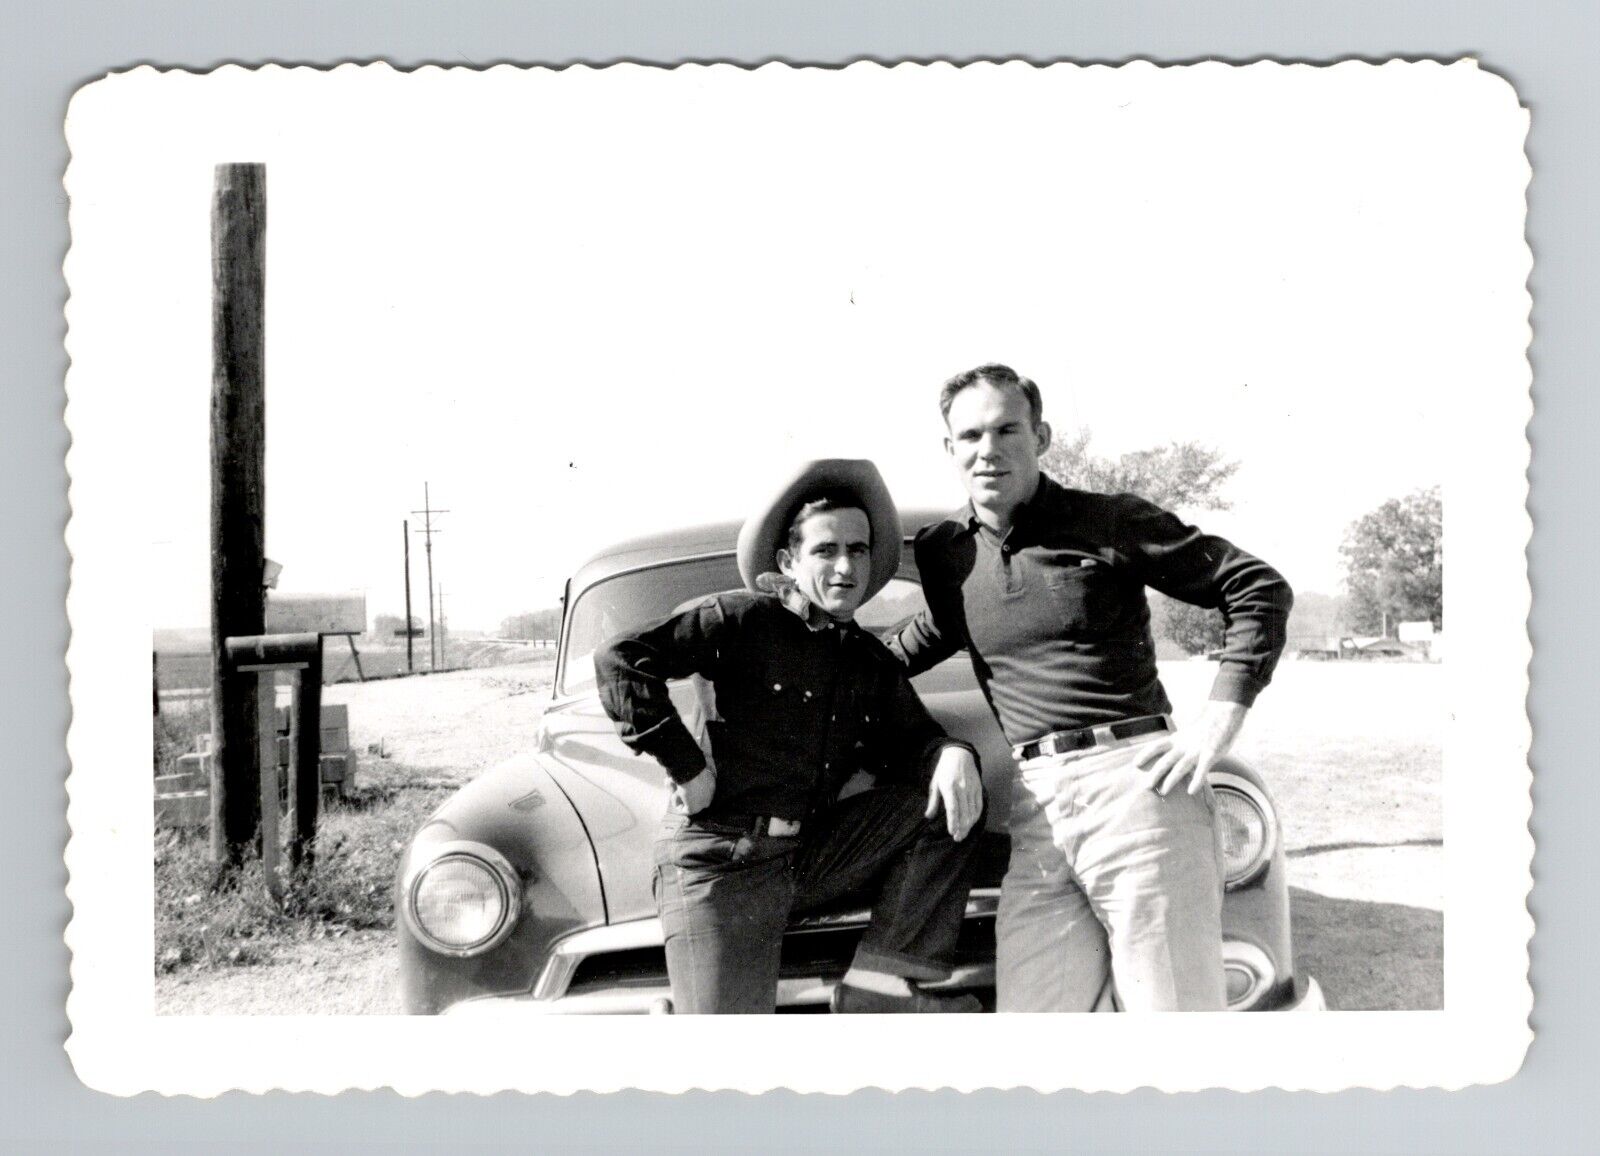 Vintage 1950s Men with Classic Car Photo 4.5x3.25 Black and White